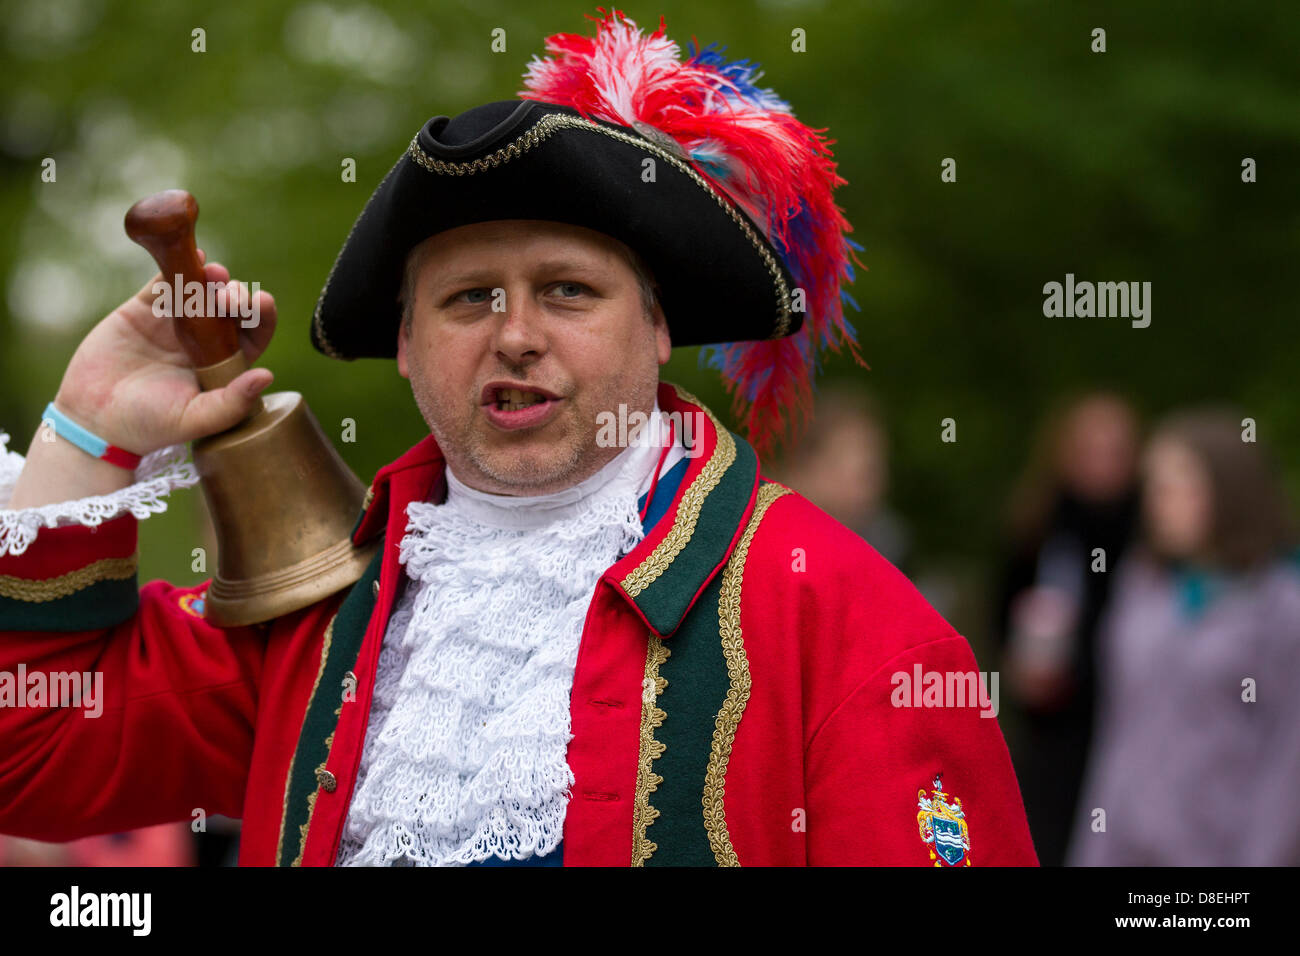 Turton, Lancashire, UK 27th May 2013.  Darryl Counsell 46,  Darwen Town Crier at the annual traditional spring fair held in the grounds of the 600-year-old Turton Tower.  The event dates back more than 200 years, but went into decline in the early 20th century. It was revived in 2008 by the Friends of Turton Tower. Stock Photo